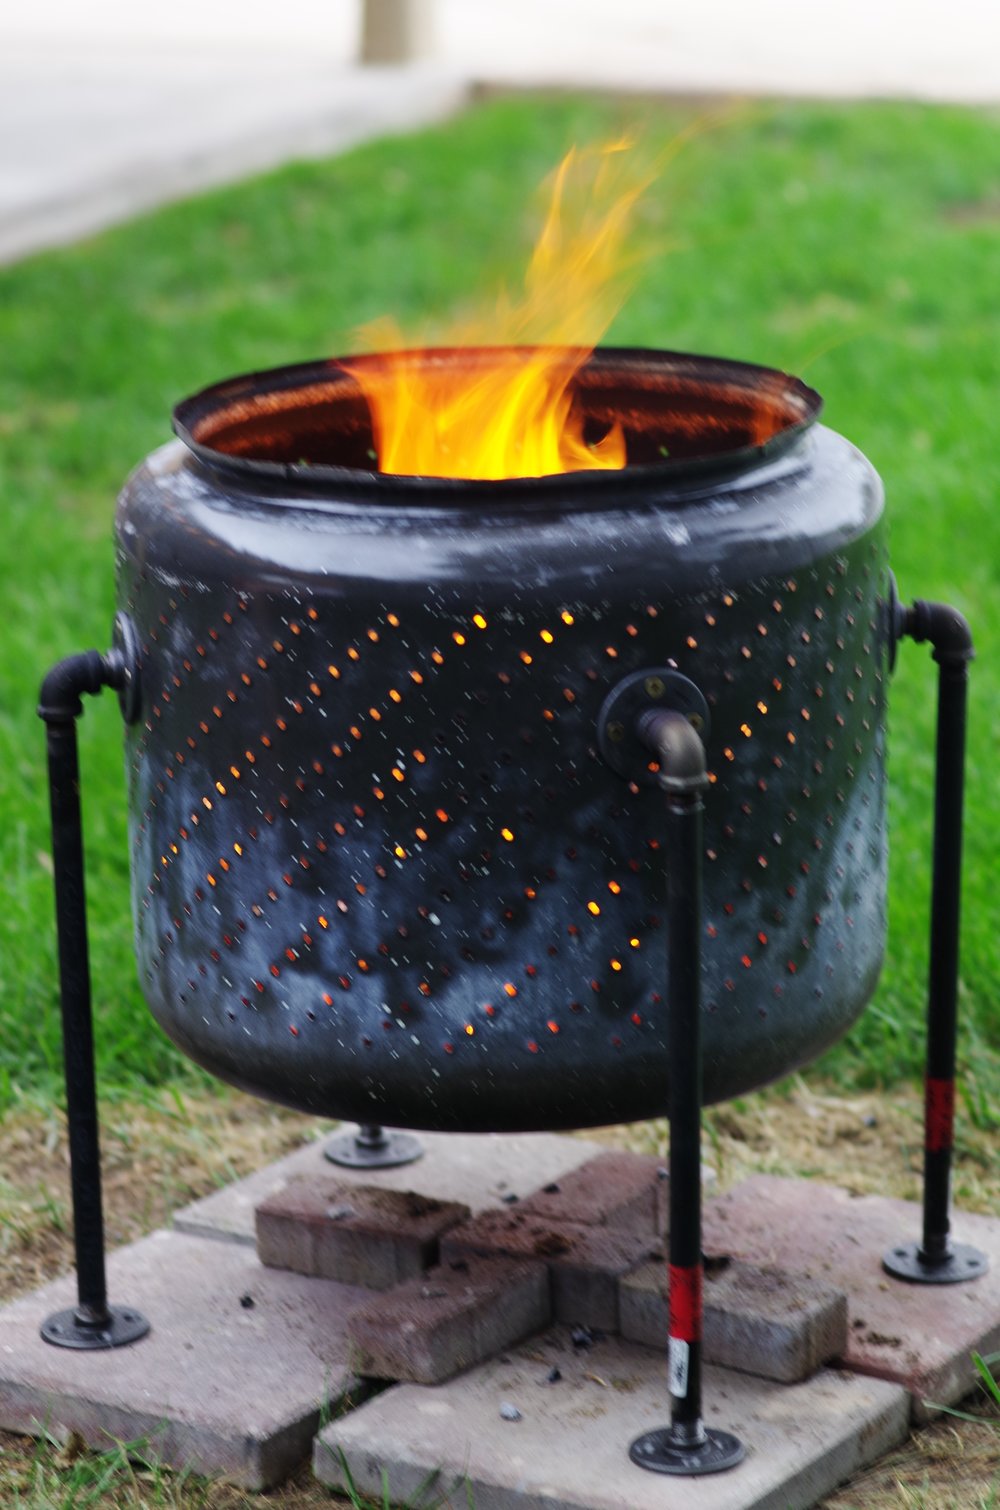 From Washing Machine Drum To Firepit, Washer Tub Fire Pit